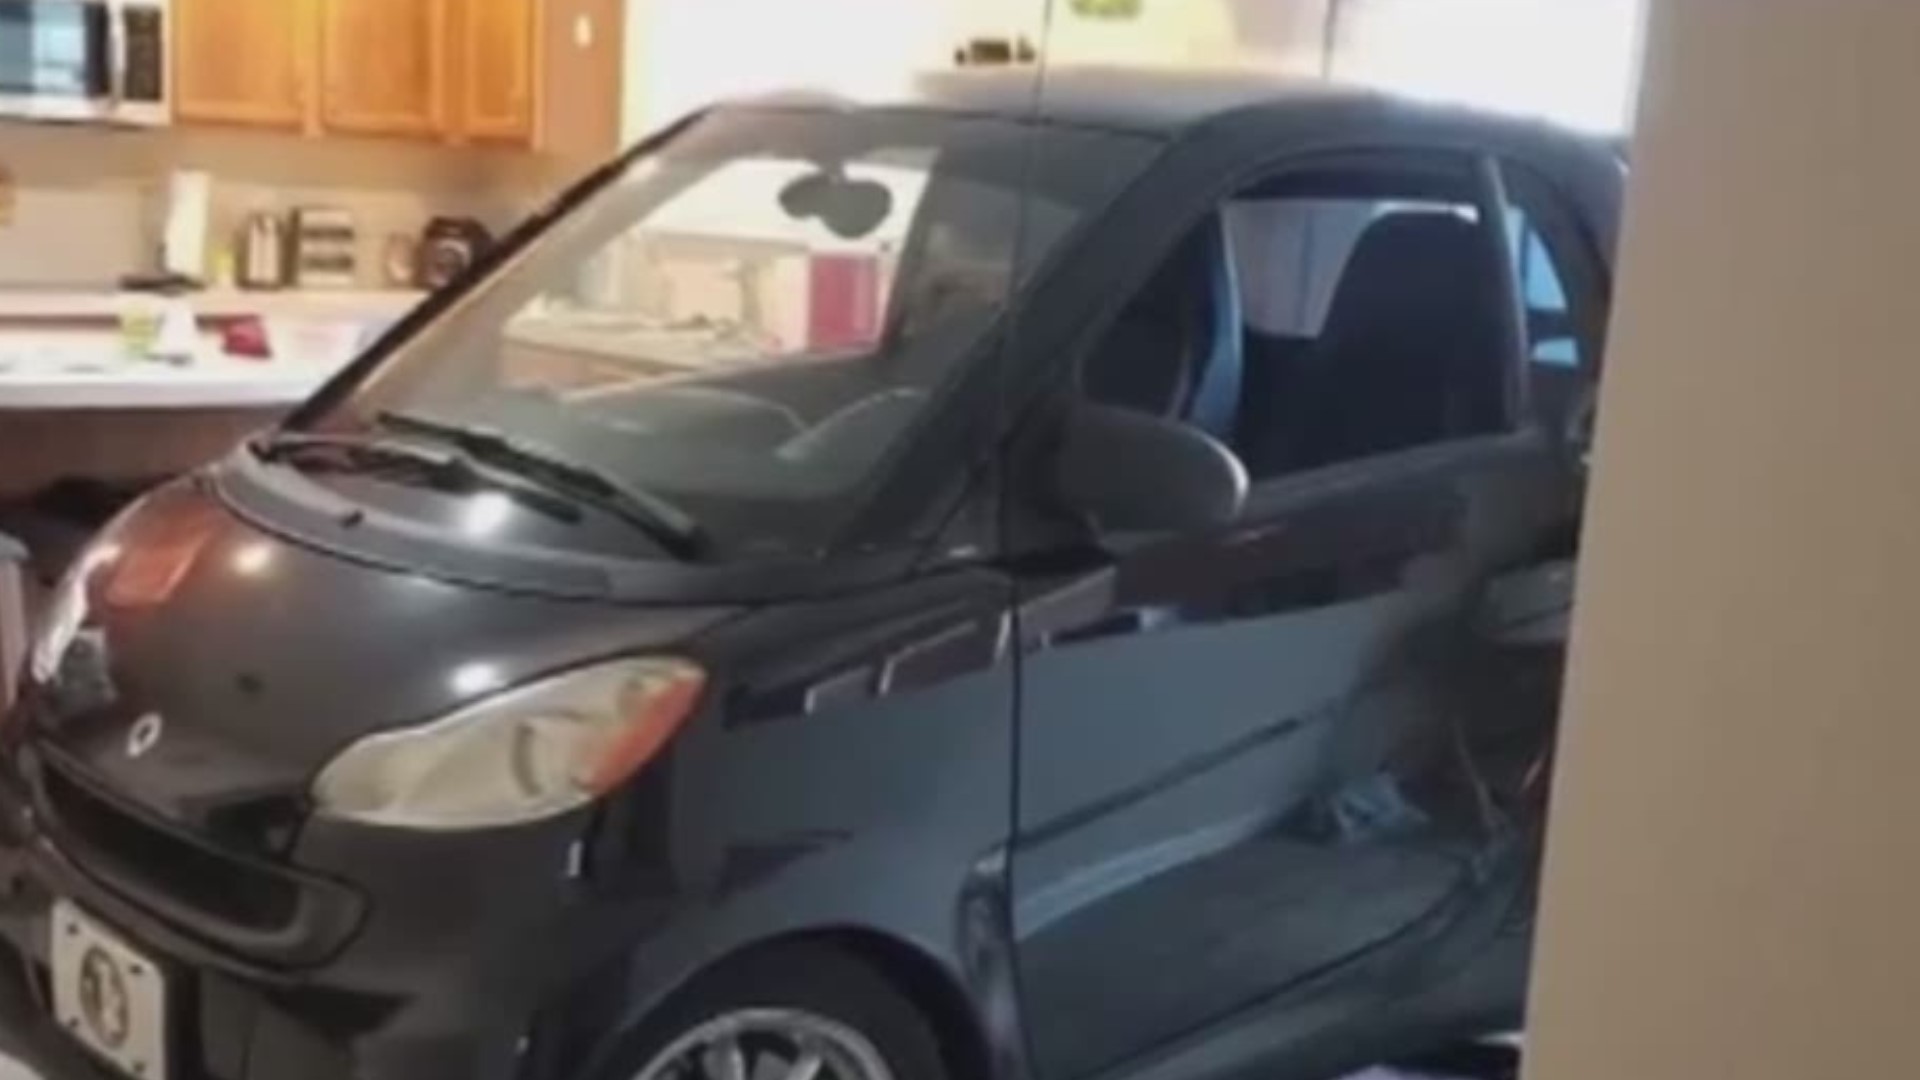 Patrick Eldridge parked his smart car in his kitchen to protect it from Hurricane Dorian because he didn't want it to "blow away" and to prove that he can park his car there. With the car in the middle of the kitchen, his wife Jessica Eldridge had to move around it to cook and serve dinner.